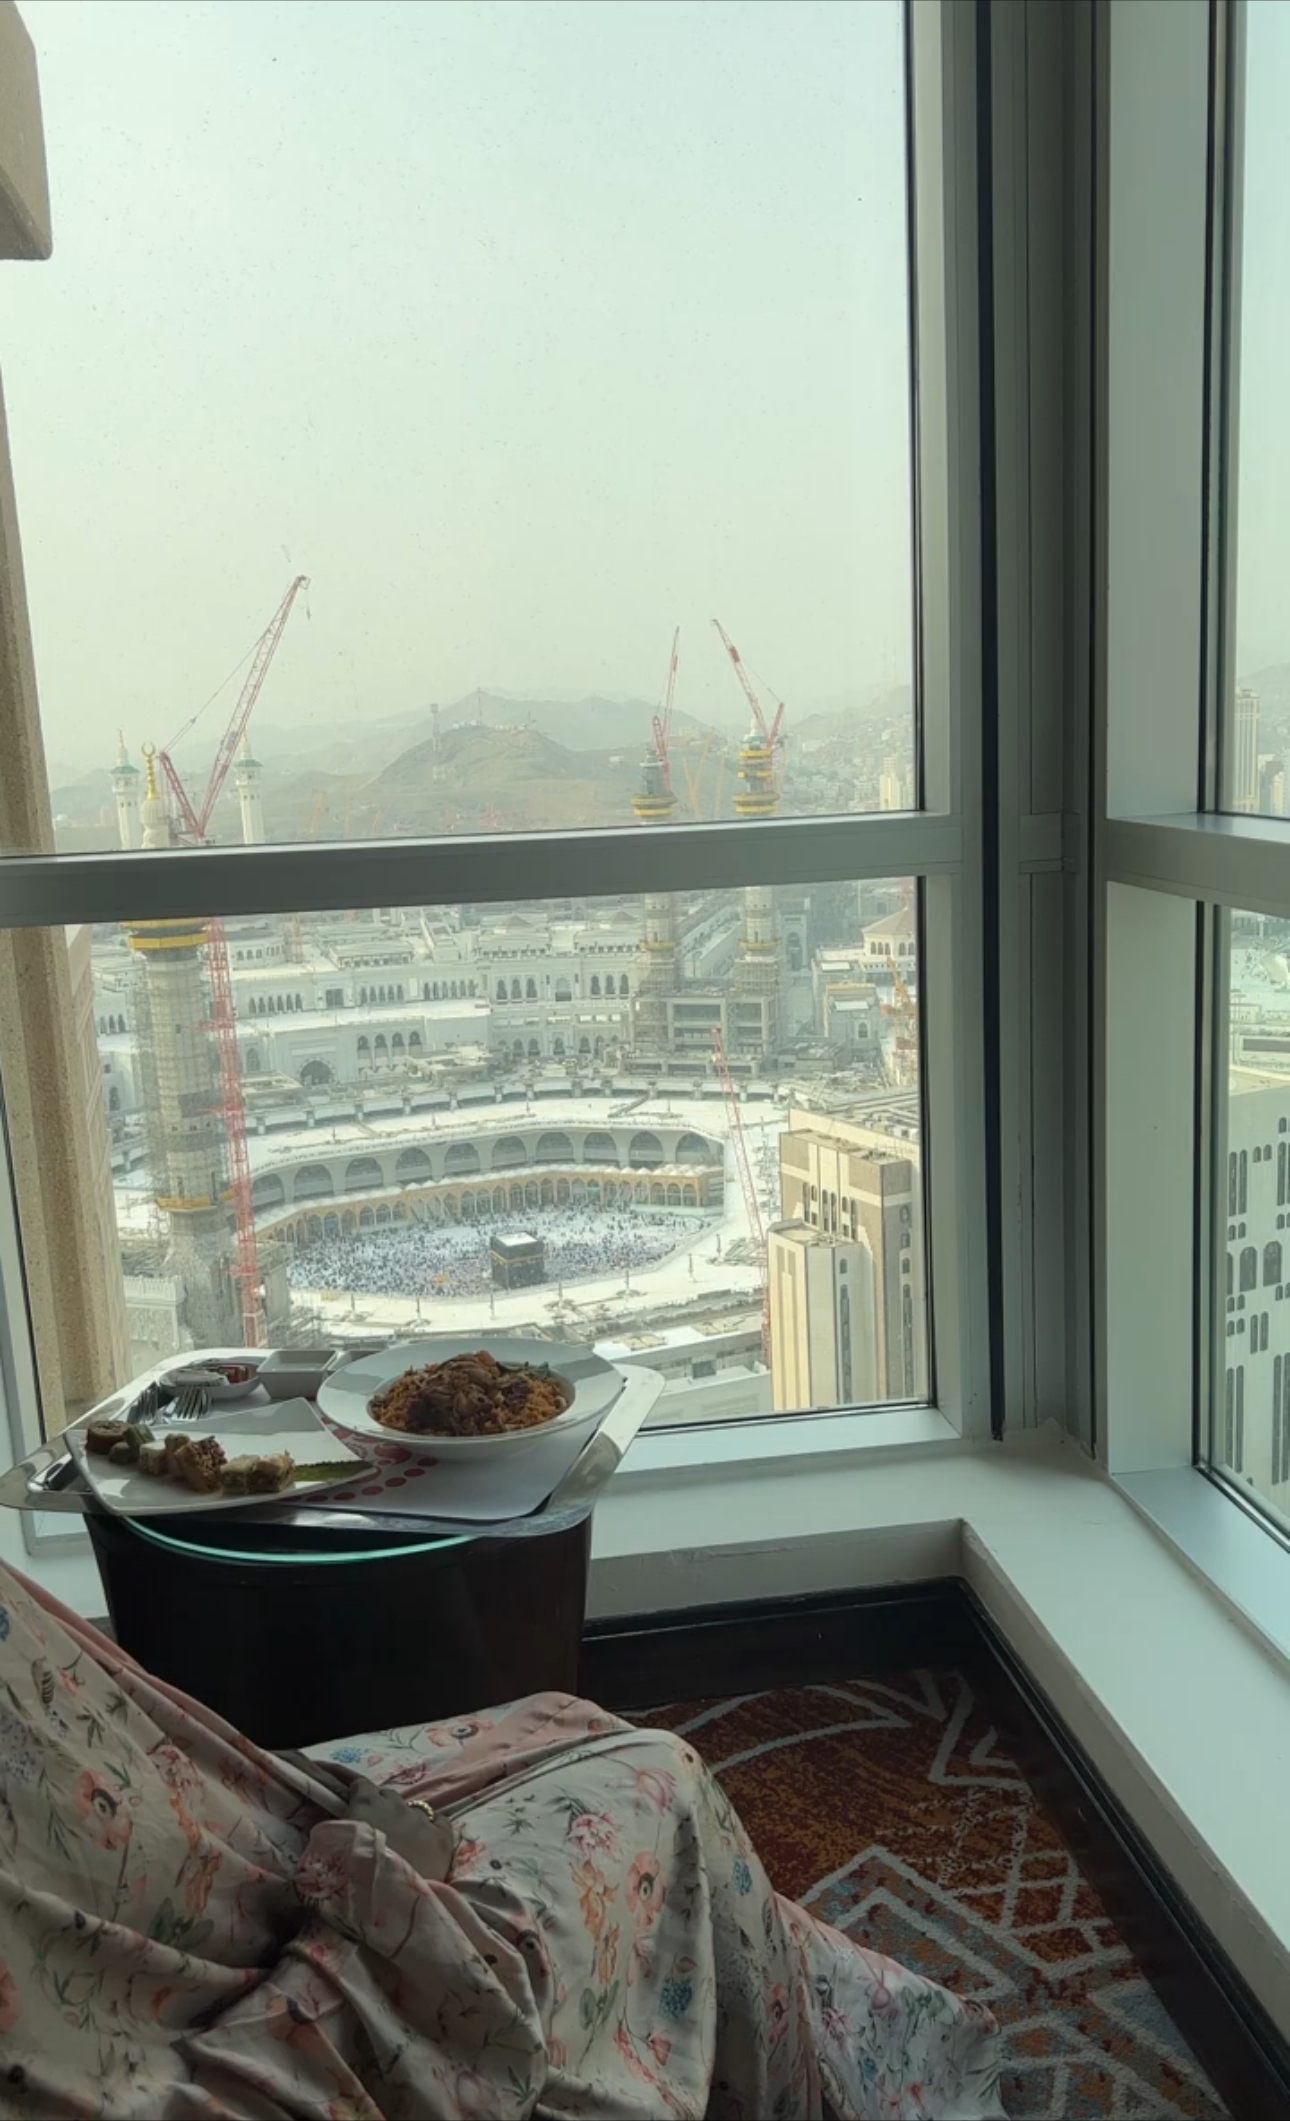 Black woman in floral prayer dress eating Arab chicken and rice in her hotel room with a view of the Kaba